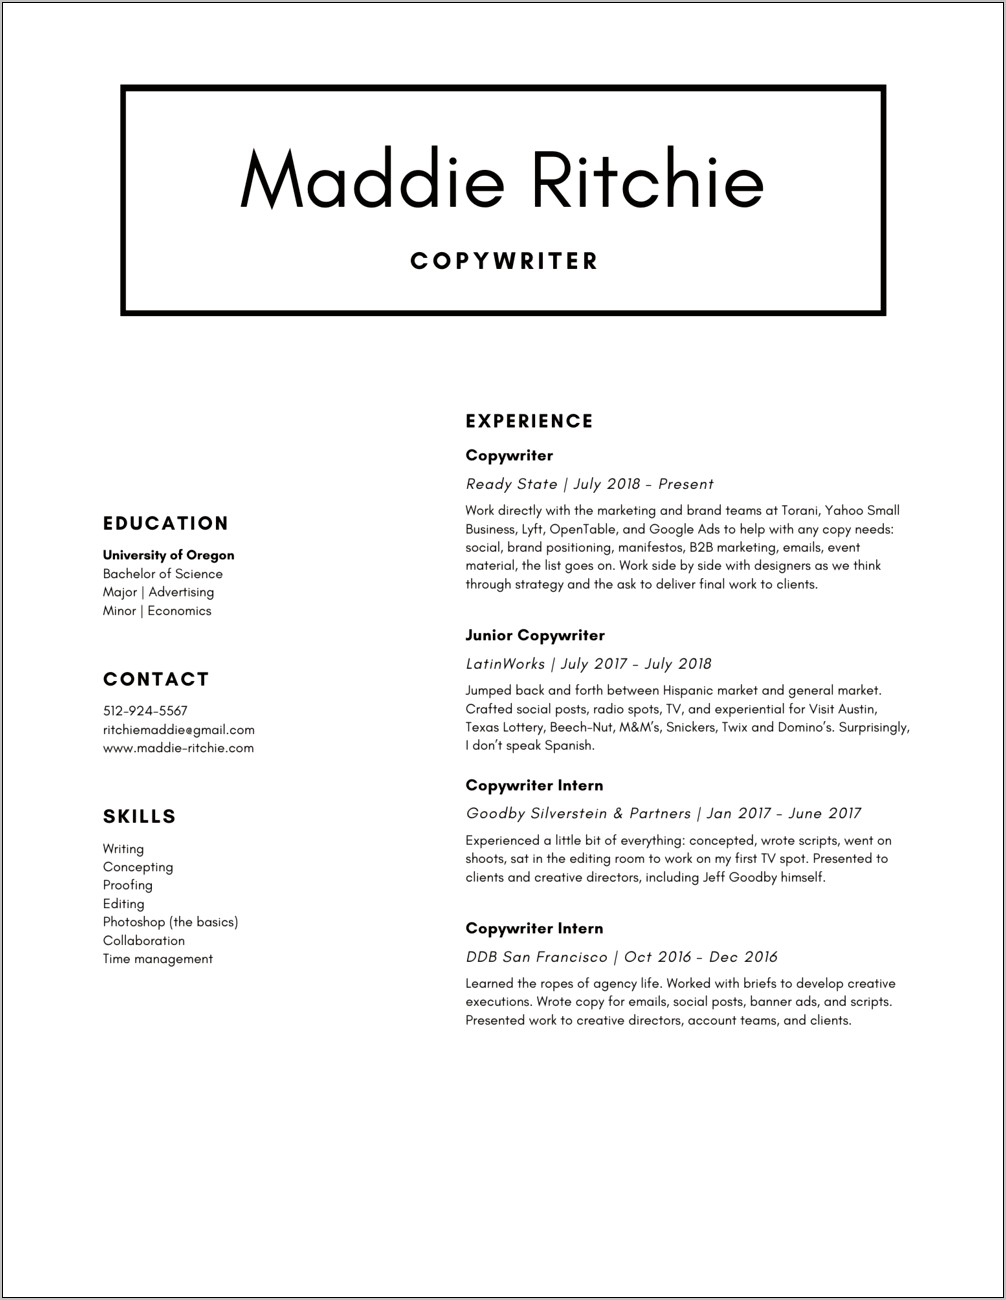 Resume Format For Marketing Job At Lottery